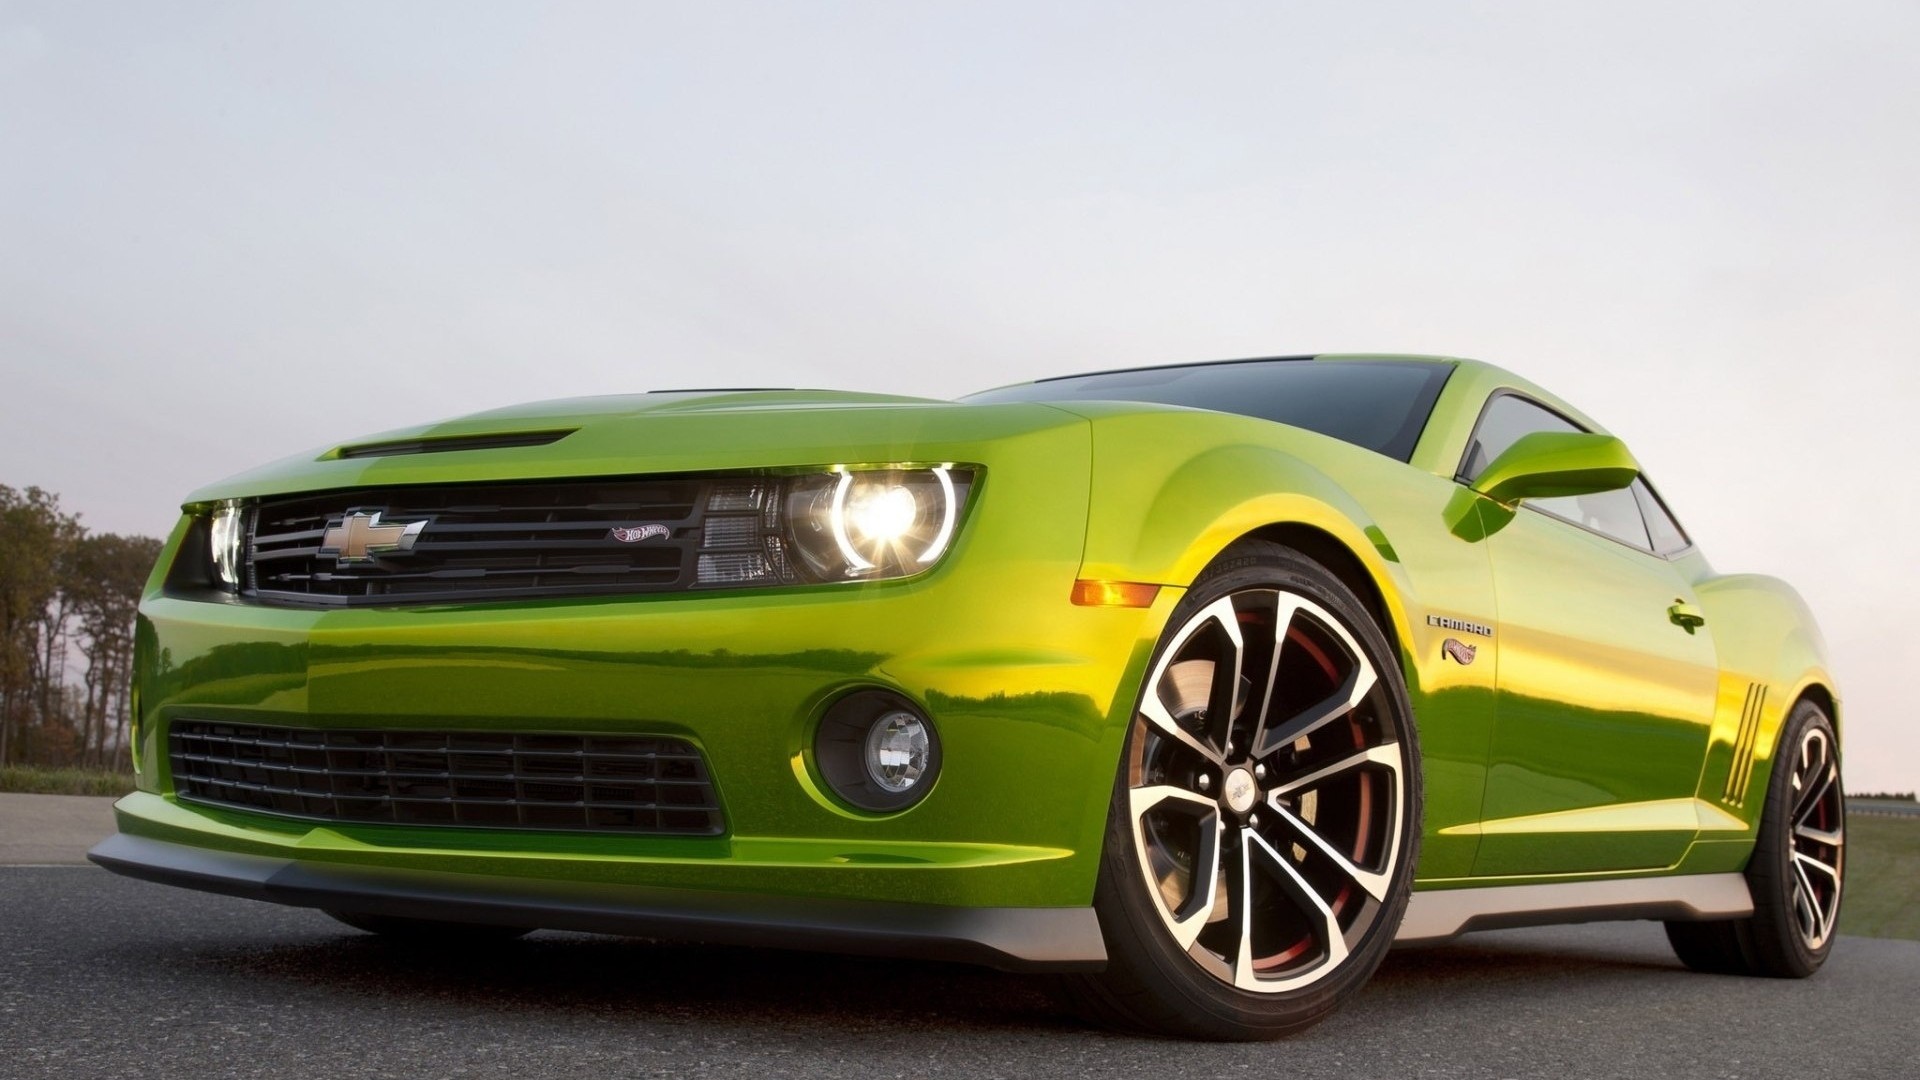 General 1920x1080 car Chevrolet Chevrolet Camaro green cars vehicle muscle cars American cars